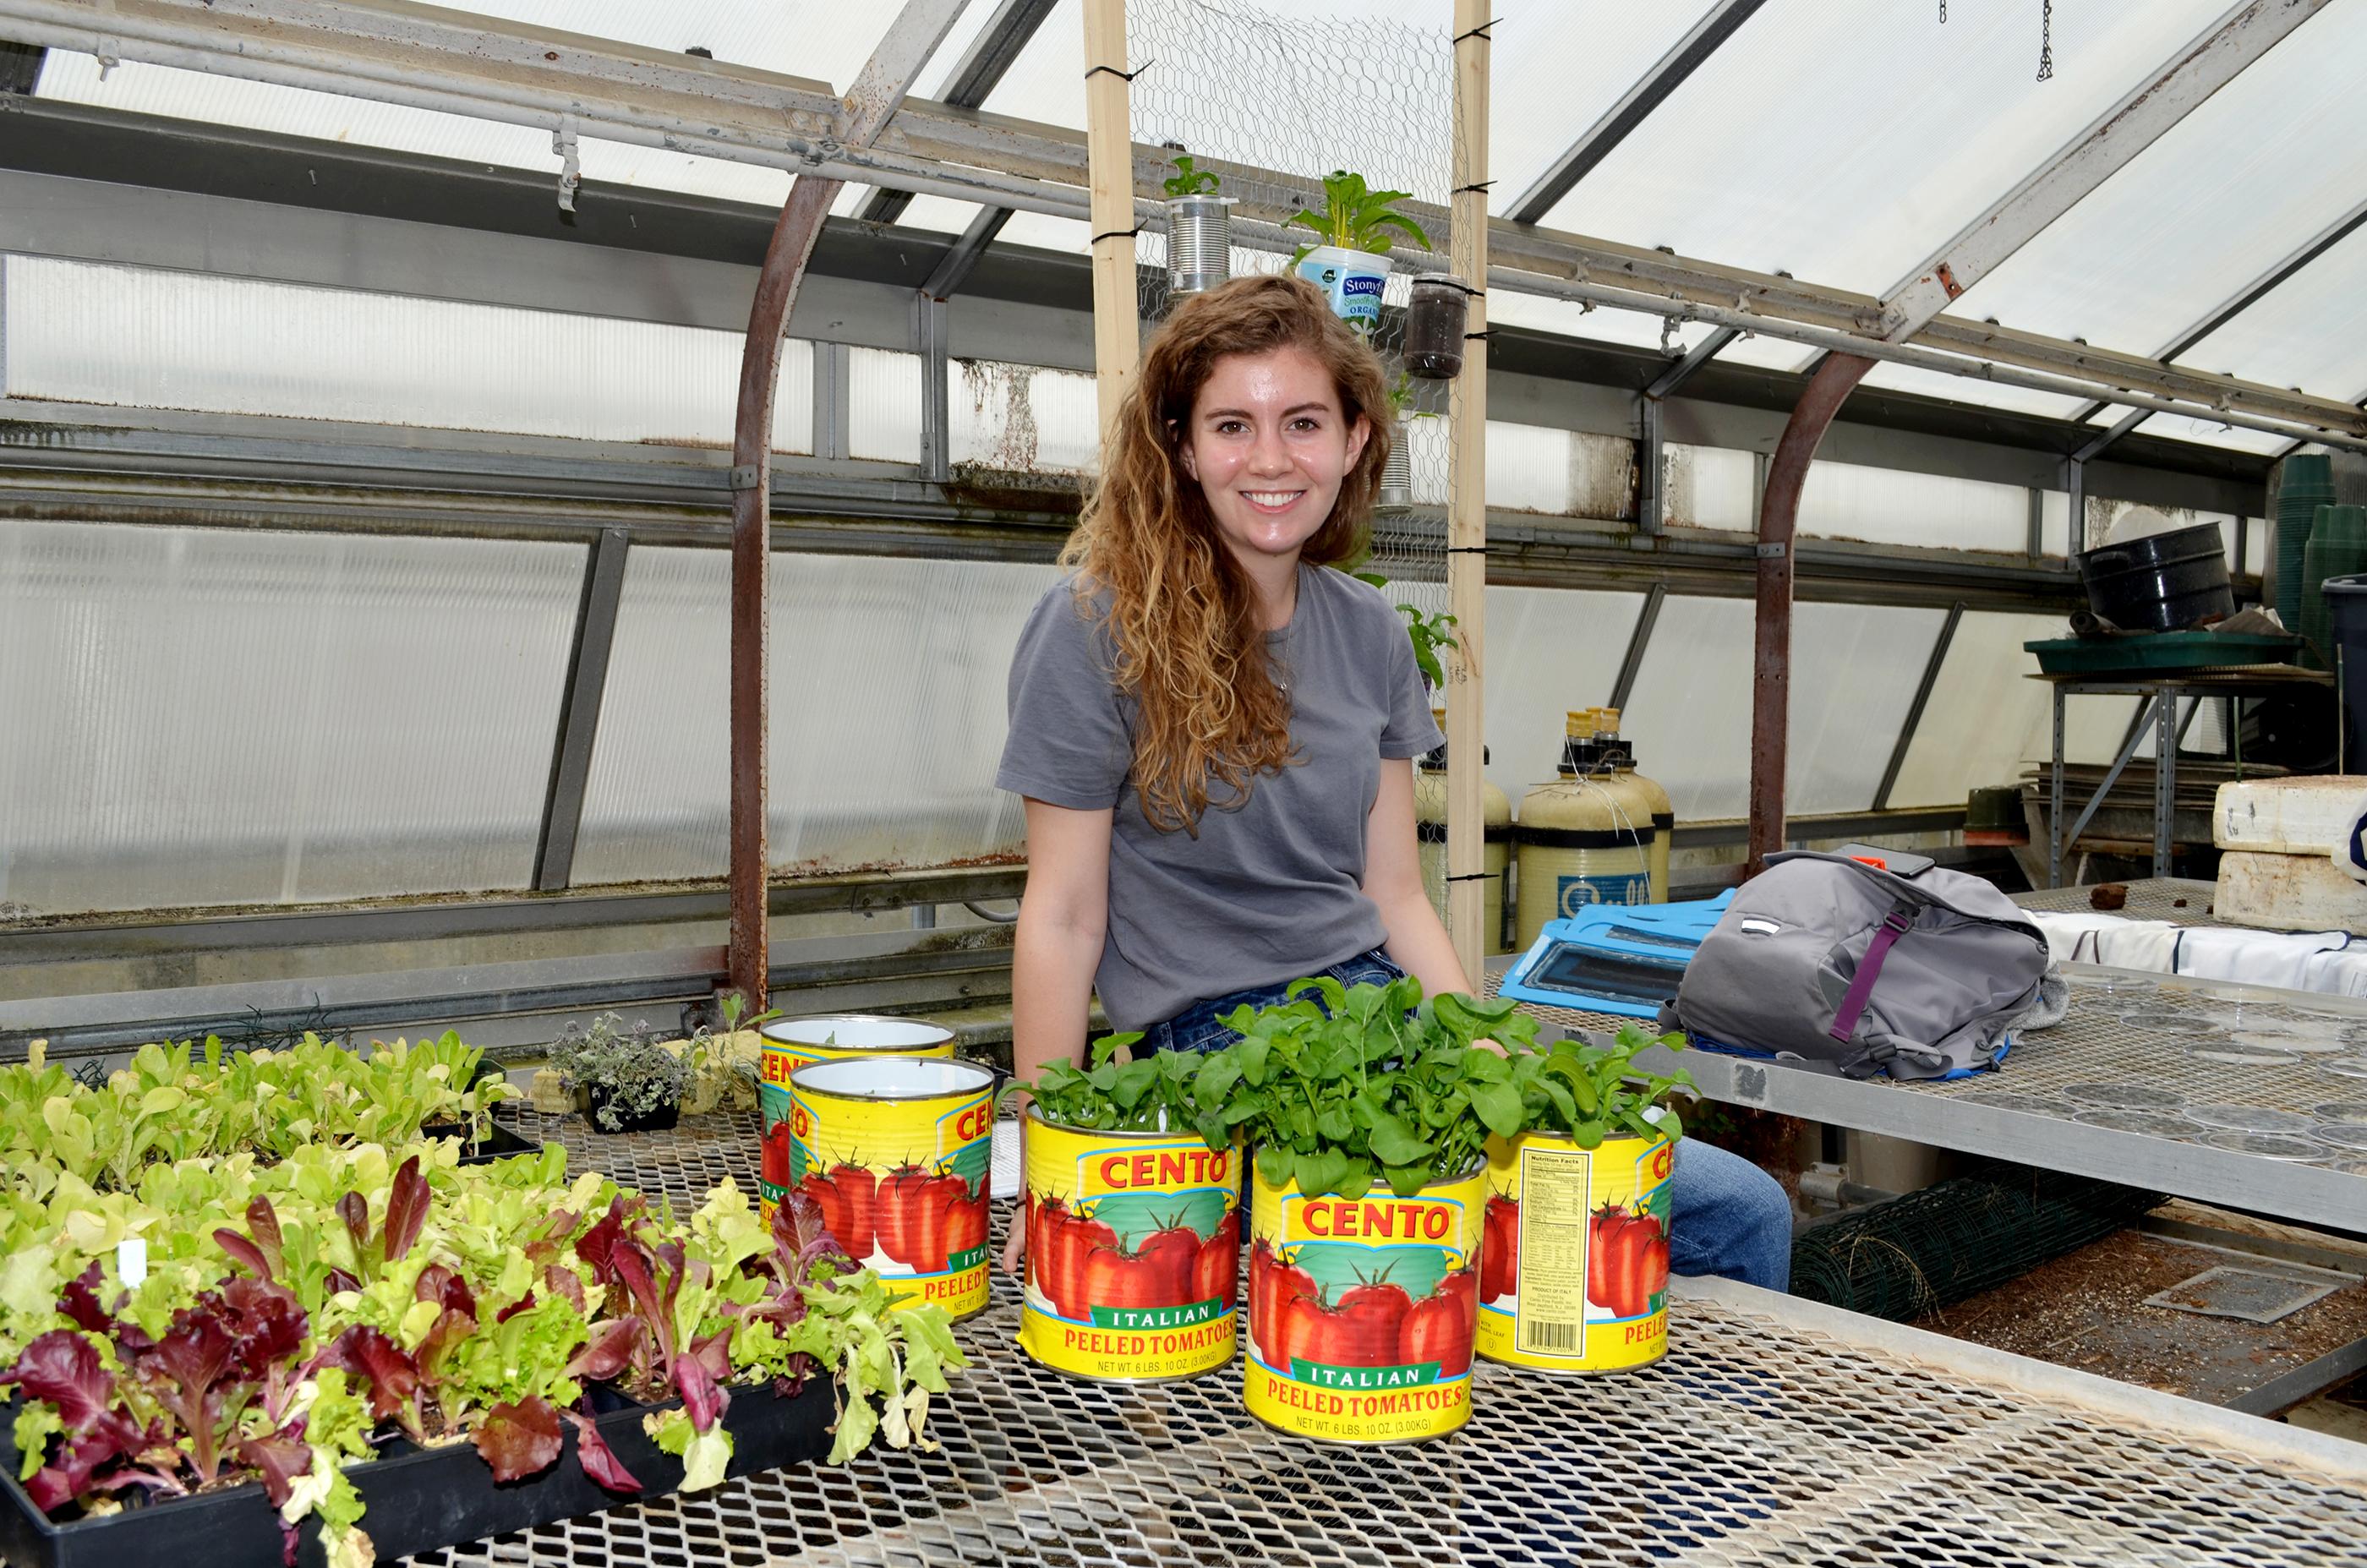 Anna Townsend's research sought to identify the most economical and feasible indoor garden for the student organization. 